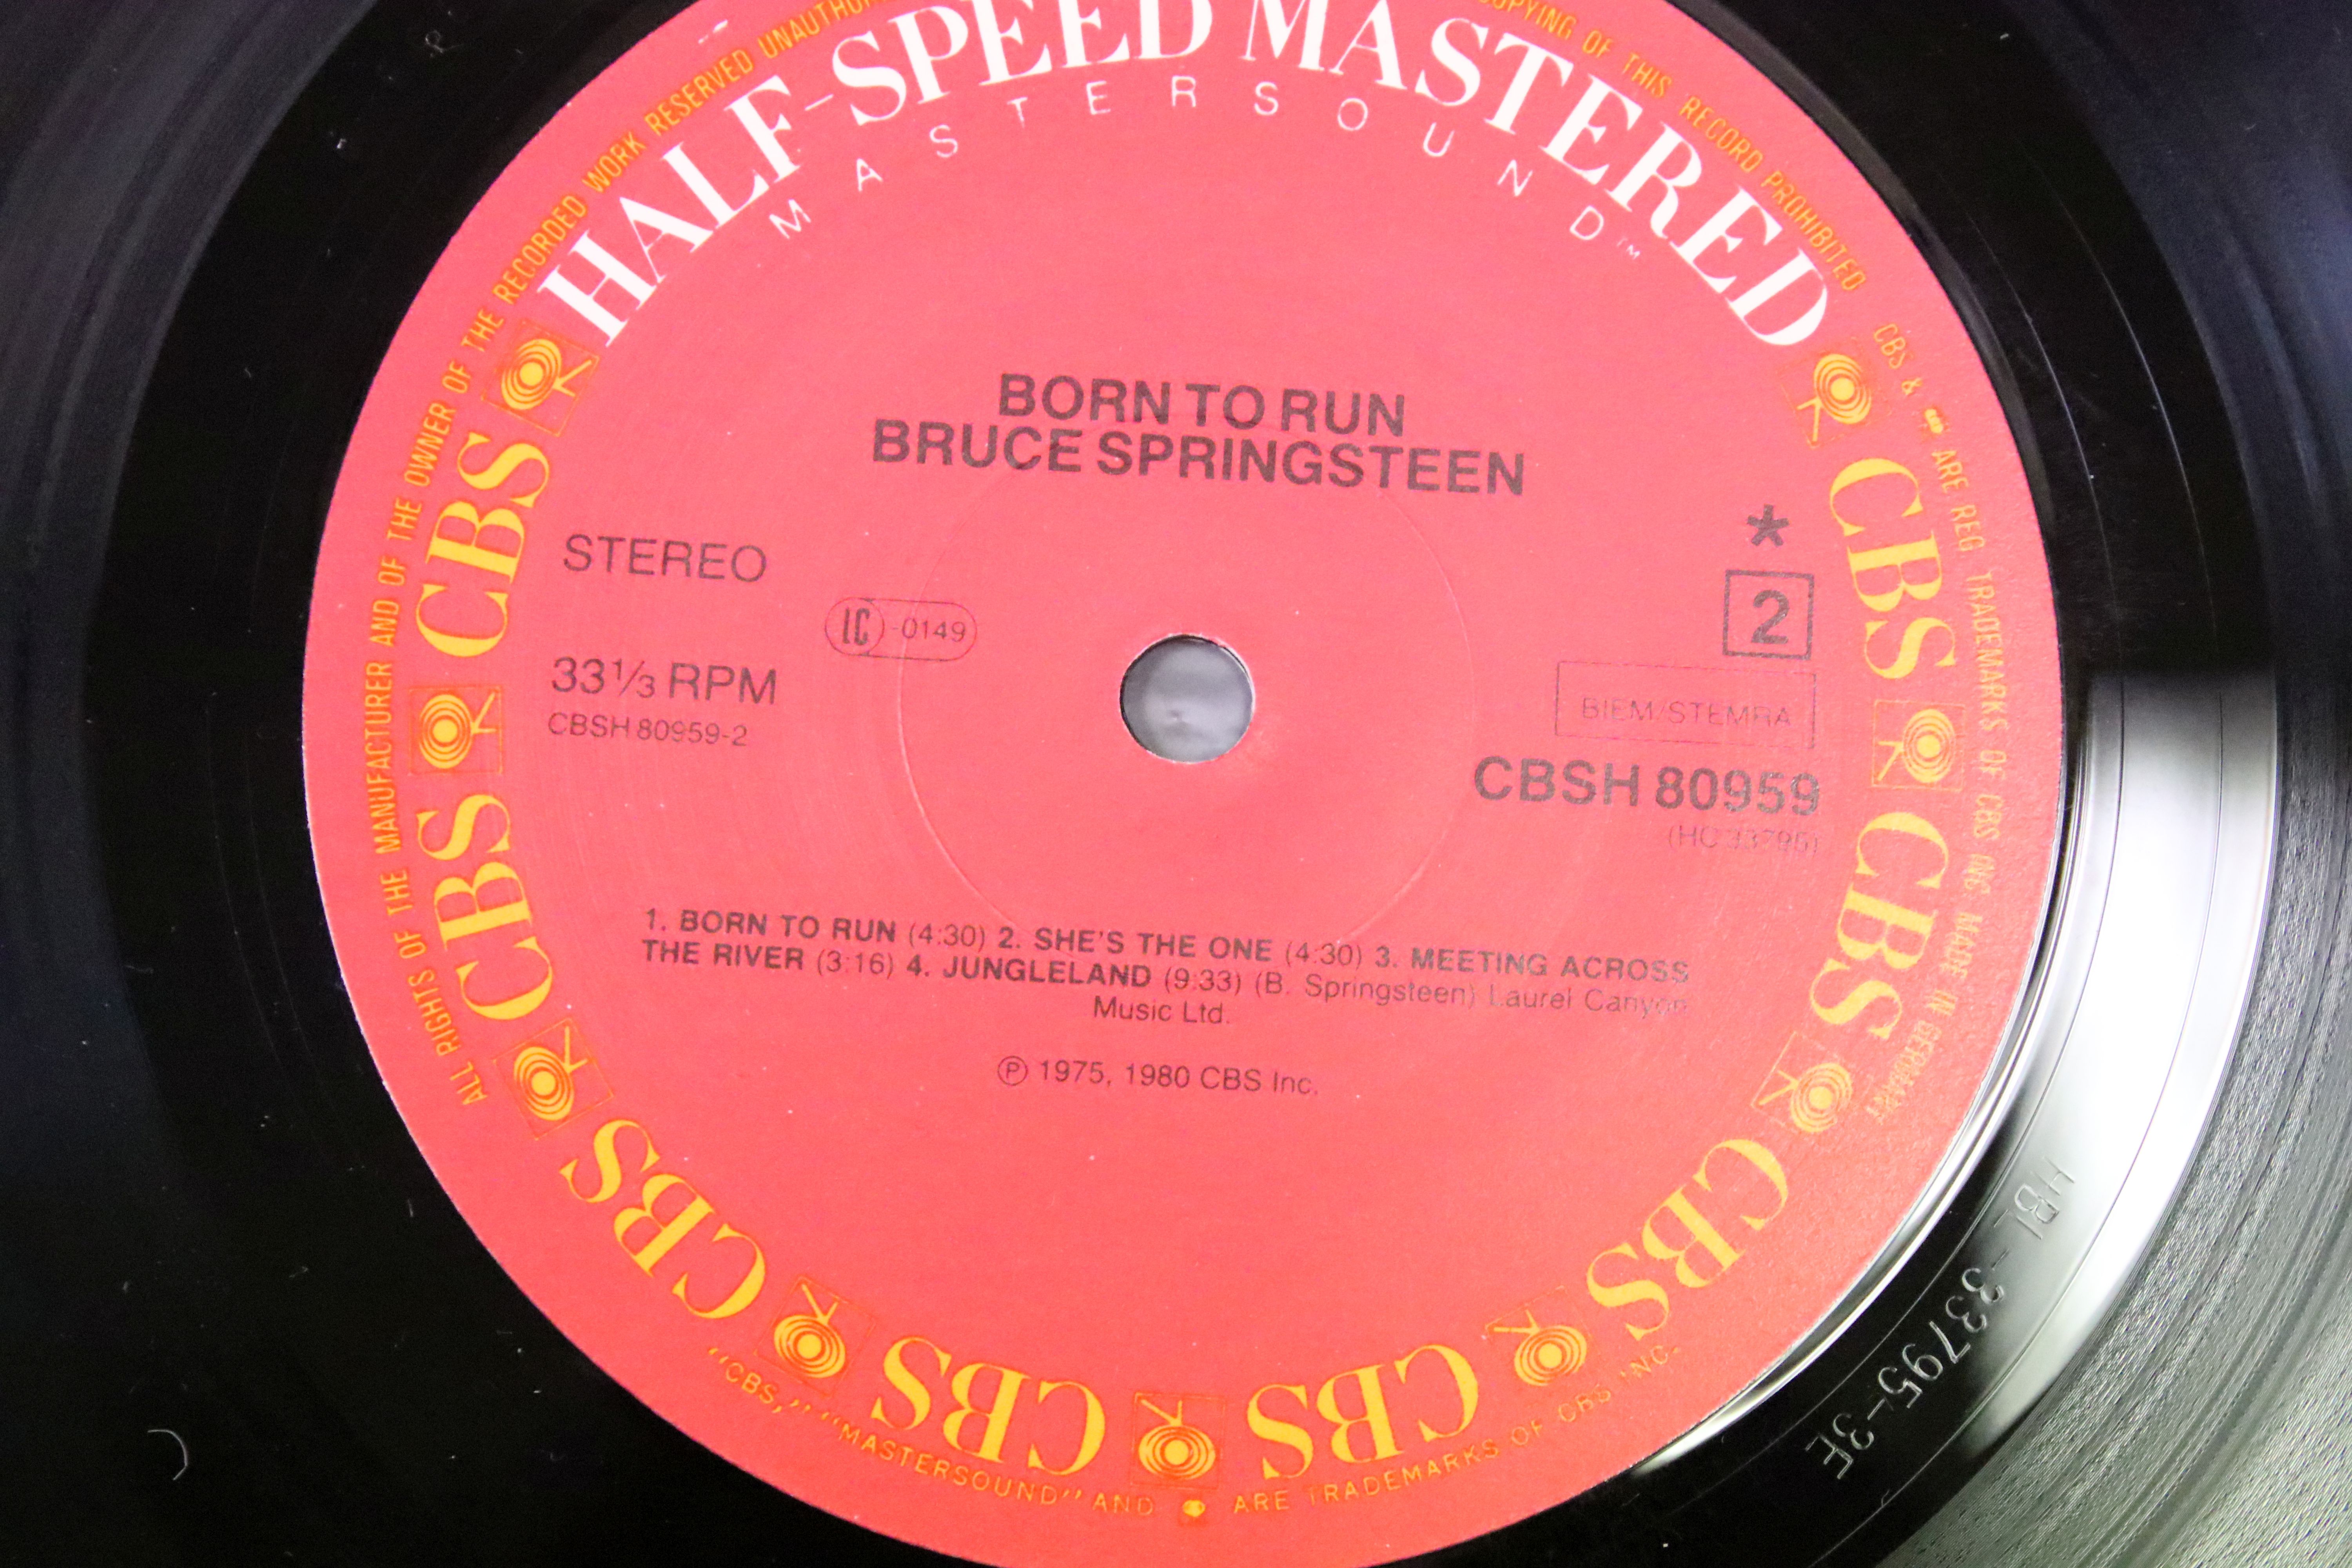 Vinyl / Autograph - 2 Bruce Springsteen Half Speed Mastered albums to include: Born To Run (CBS - Image 6 of 9